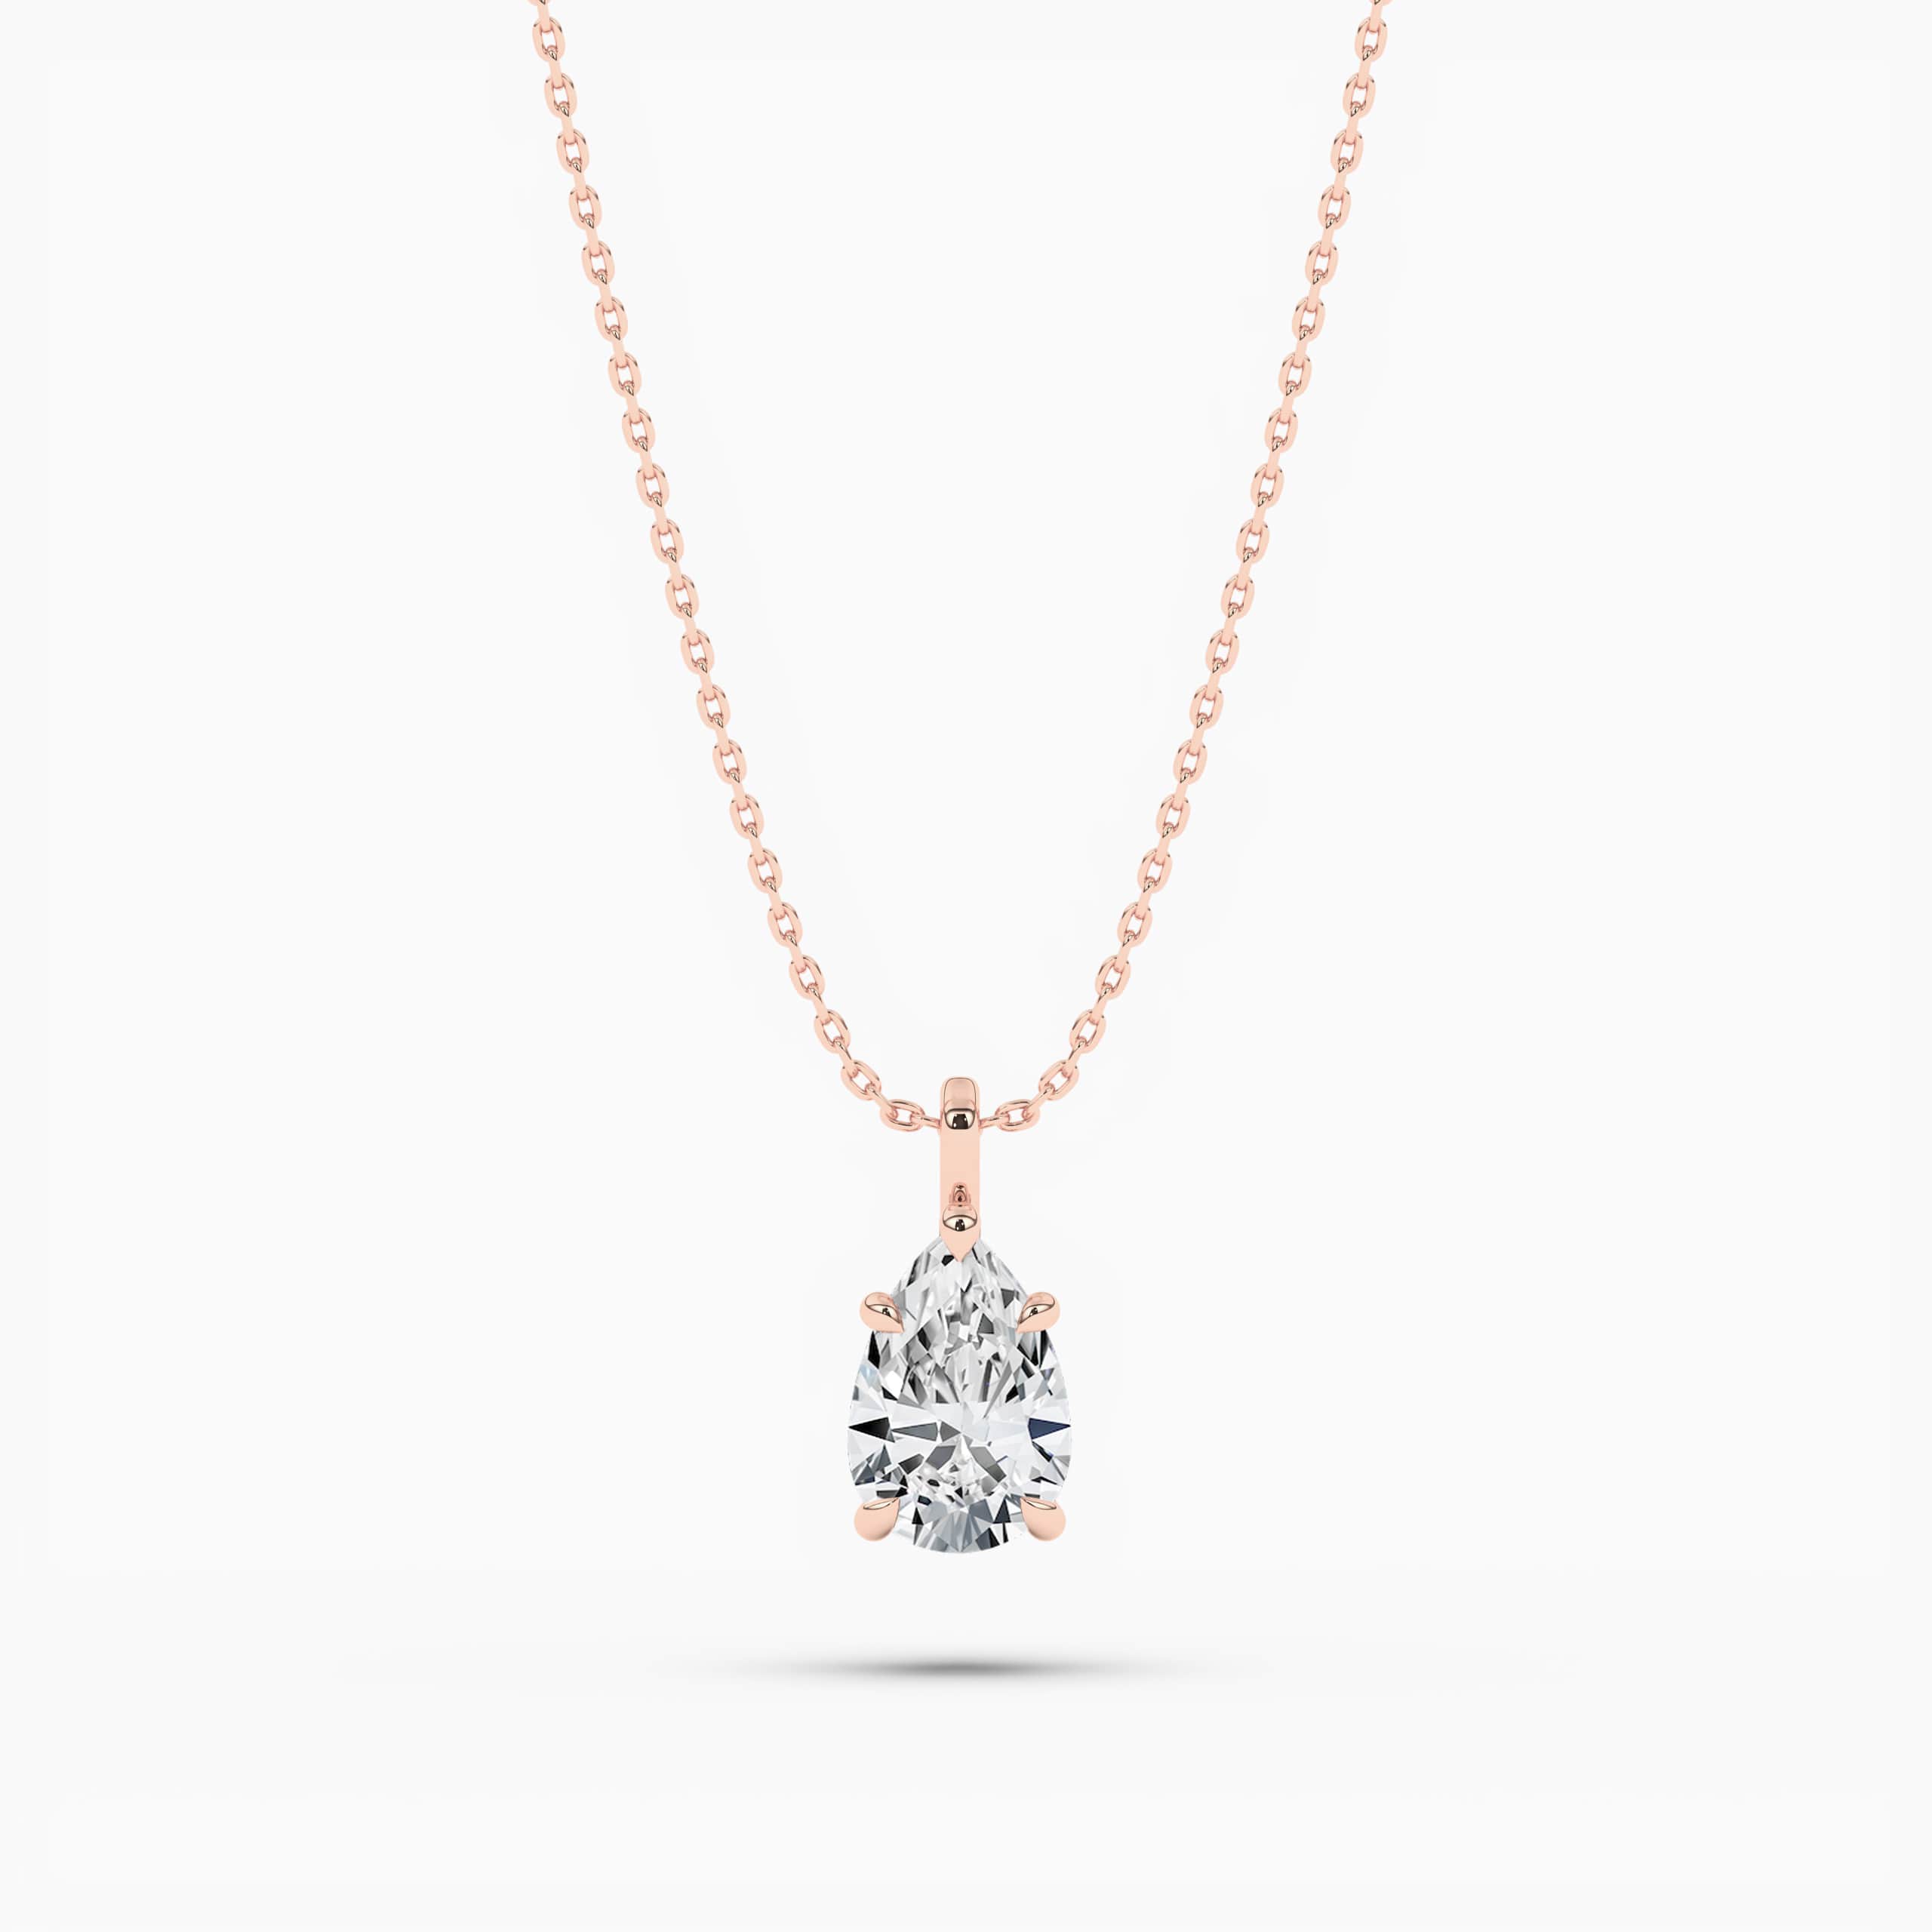 Pear Diamond Necklace, Solitaire Necklace In Rose Gold